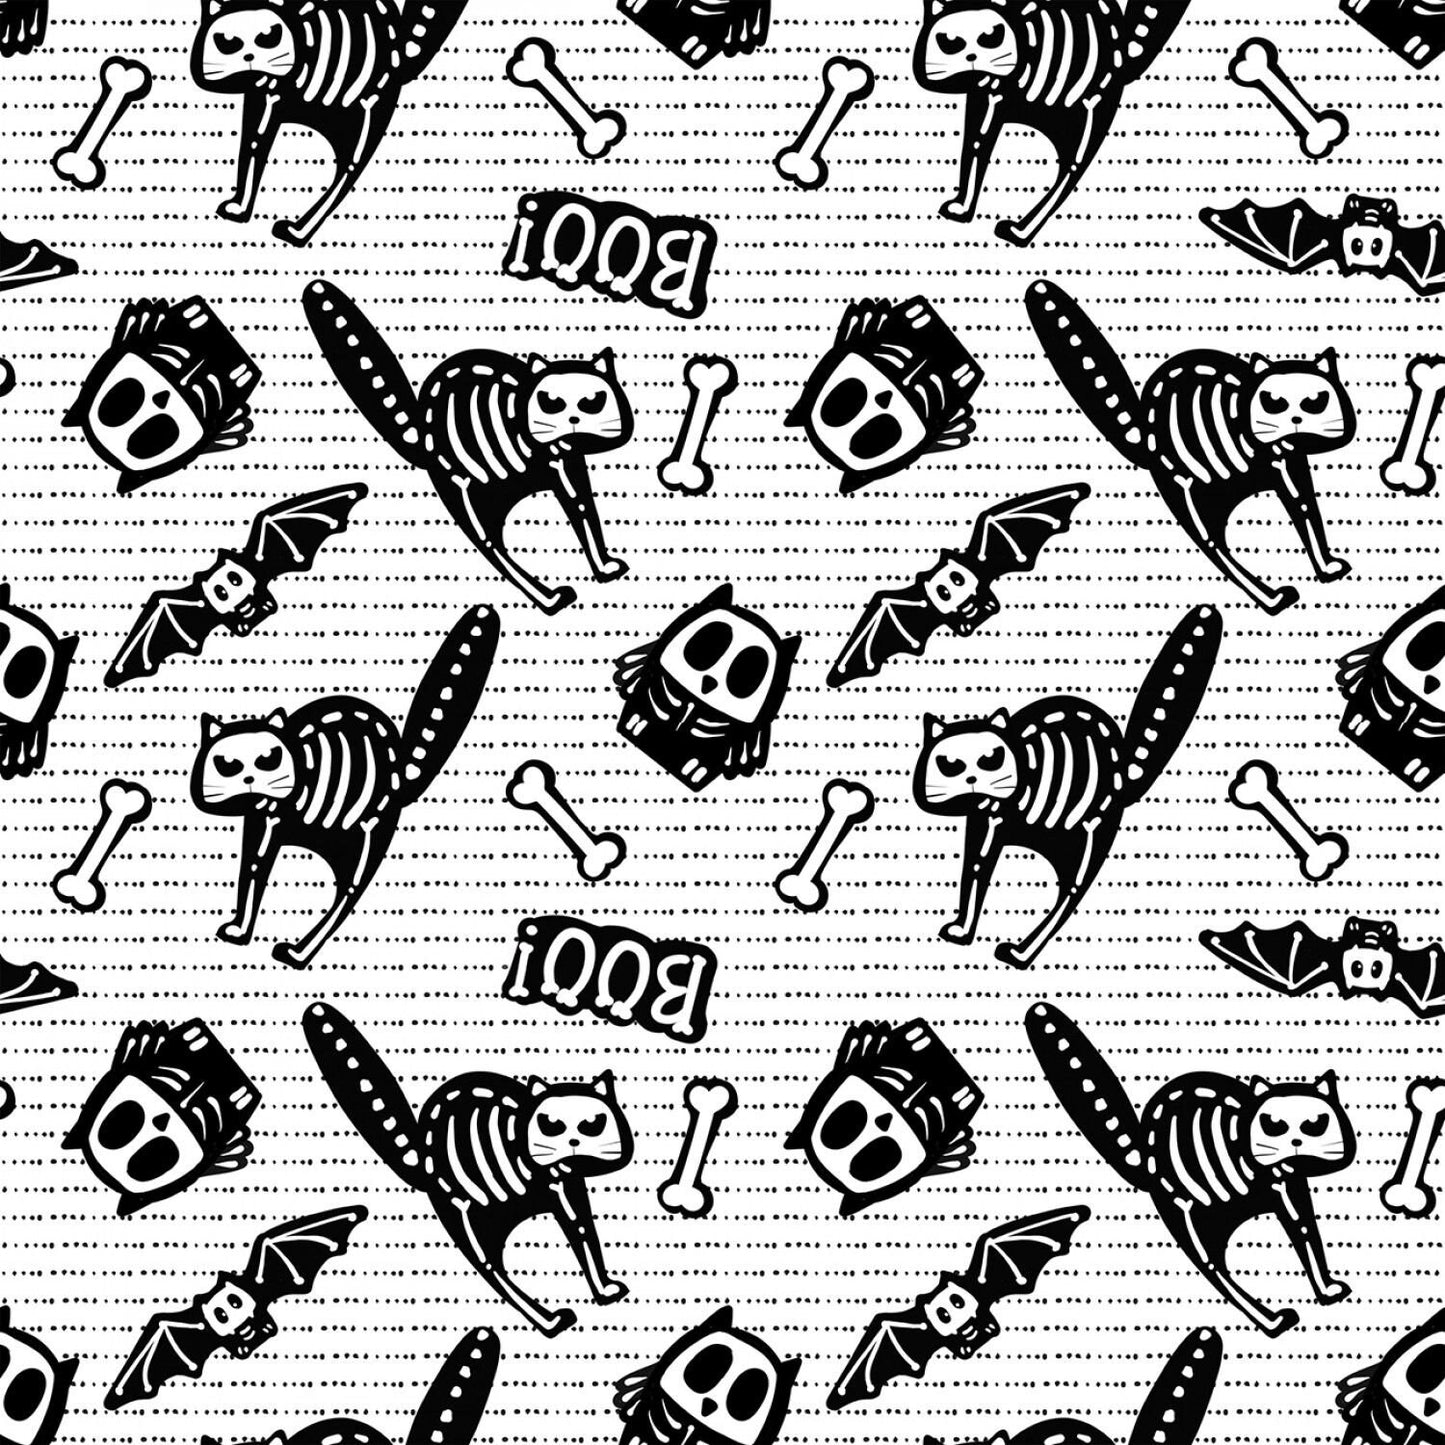 Glow Ghosts by Shelly Comiskey Tossed Bones of Motifs Black/White 9606G-9 Glow in the Dark Cotton Woven Fabric